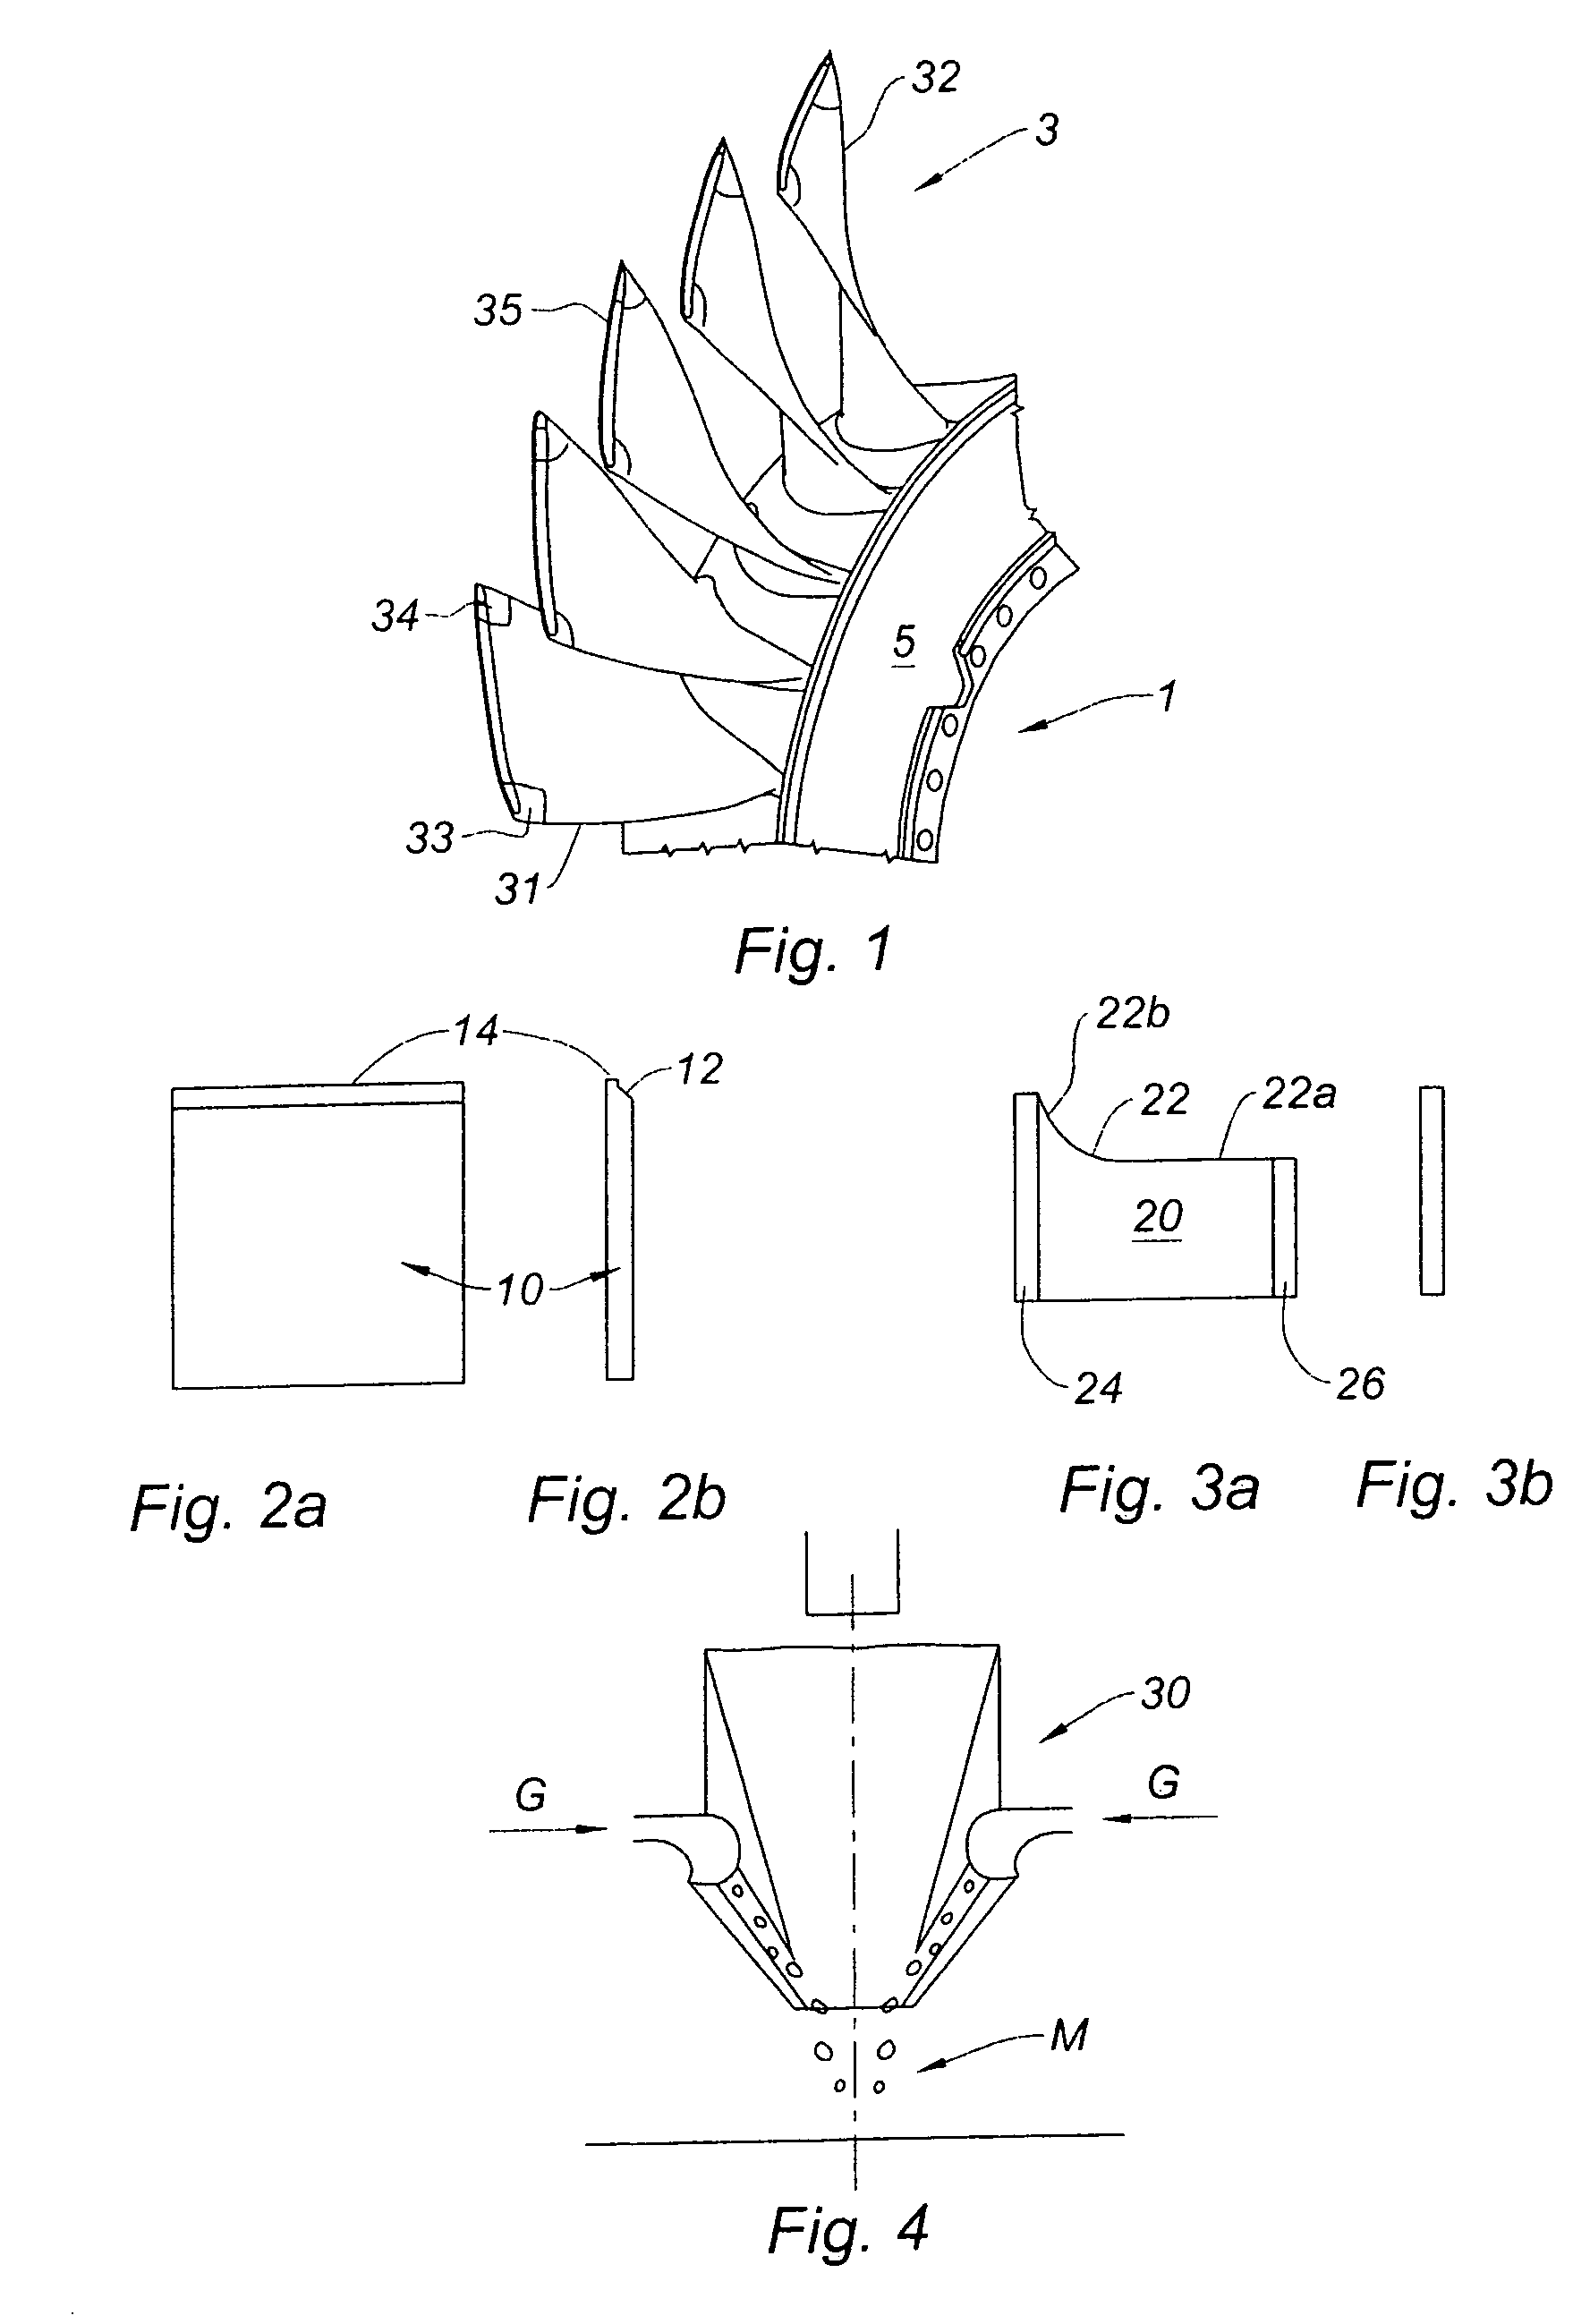 Method of repairing a blisk and test pieces by welding